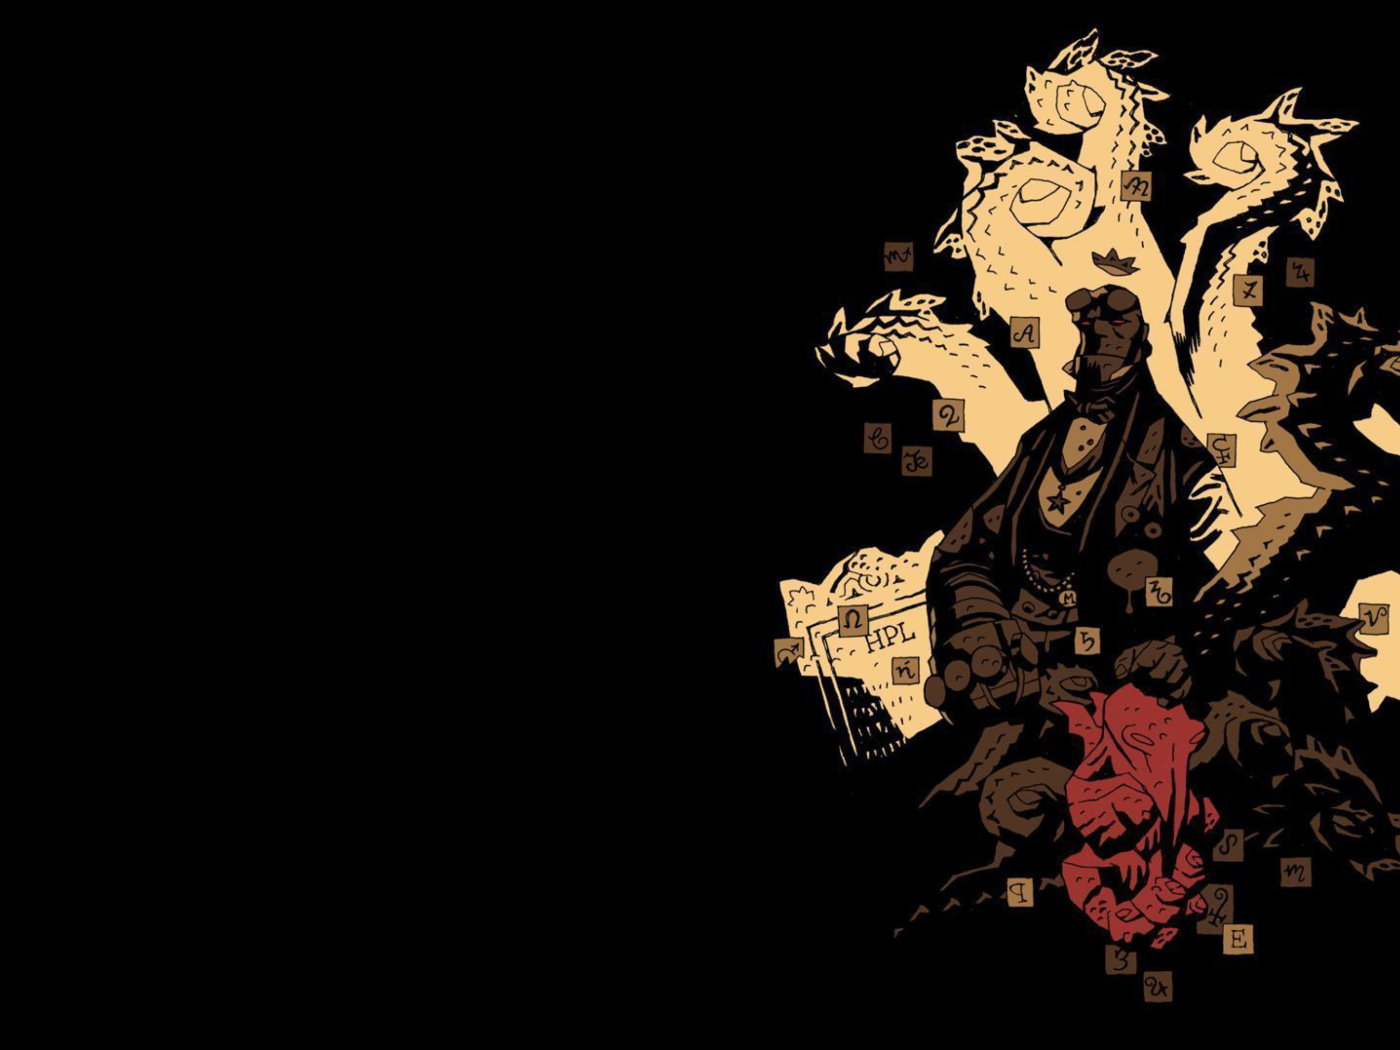 Hellboy The First 20 Years wallpaper 1400x1050